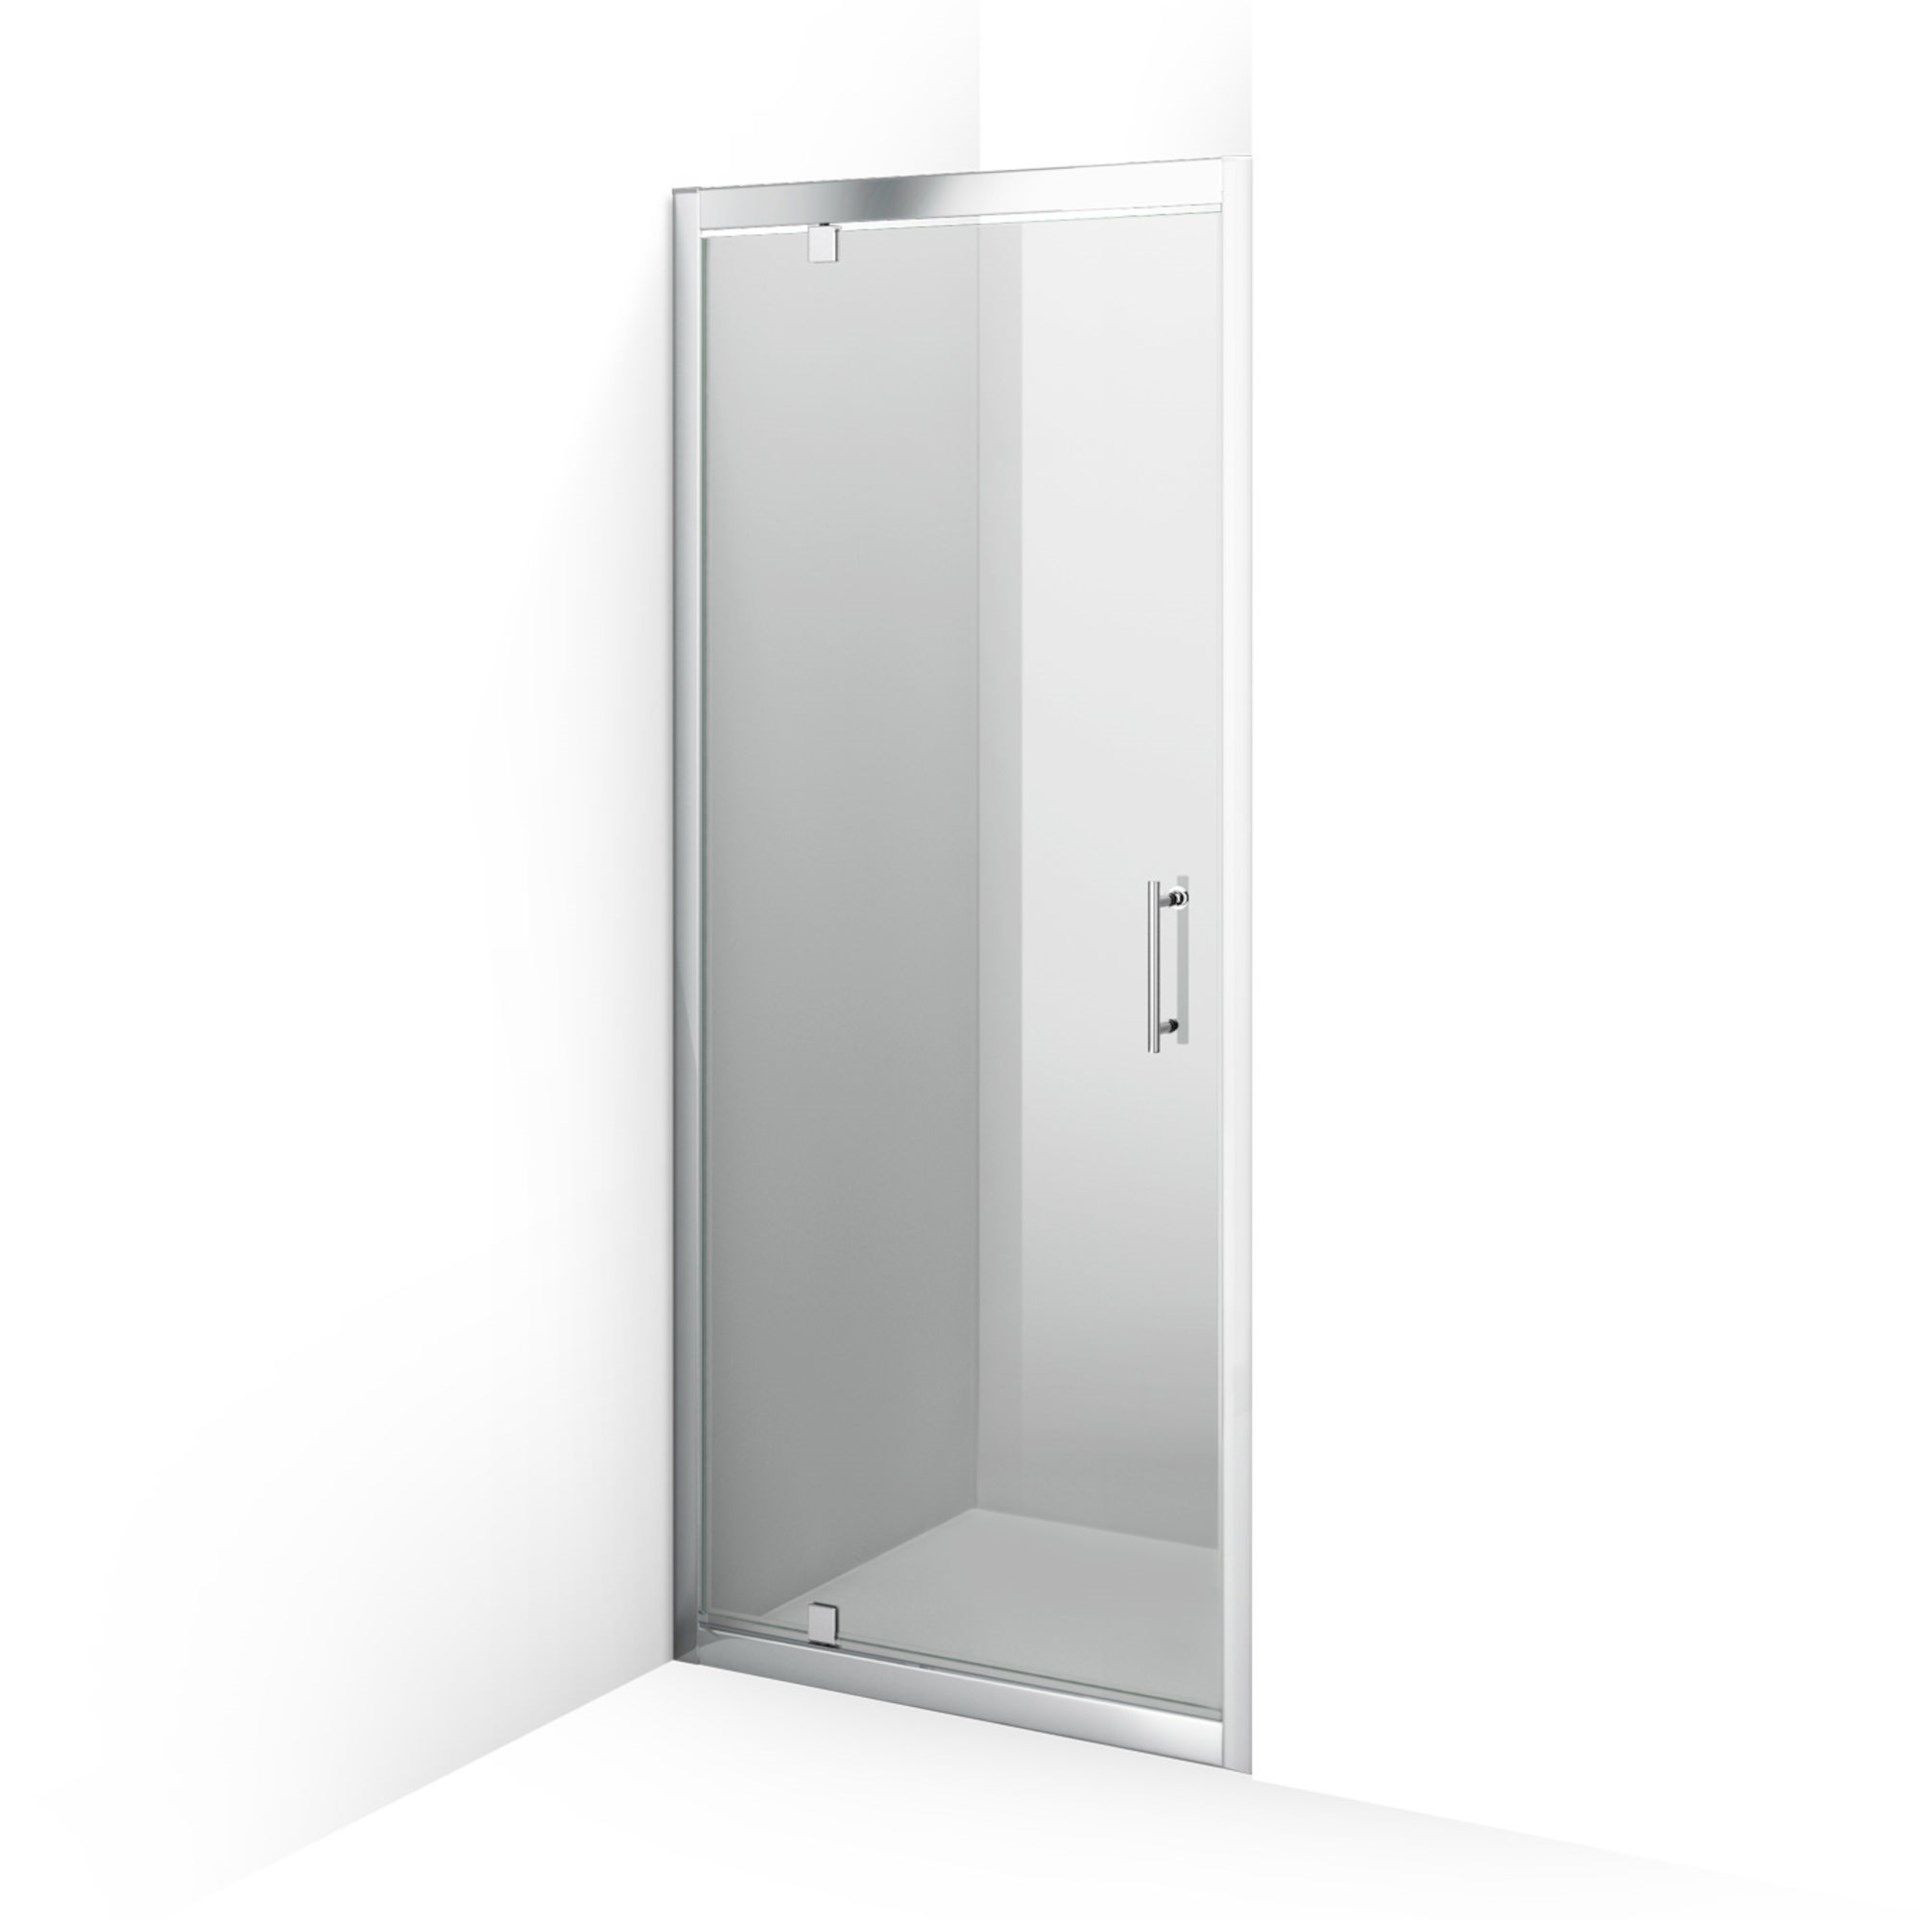 Brand New Twyfords 700mm - 6mm - Premium Pivot Shower Door. RRP £299.99.8mm Safety Glass Fully water - Image 2 of 3